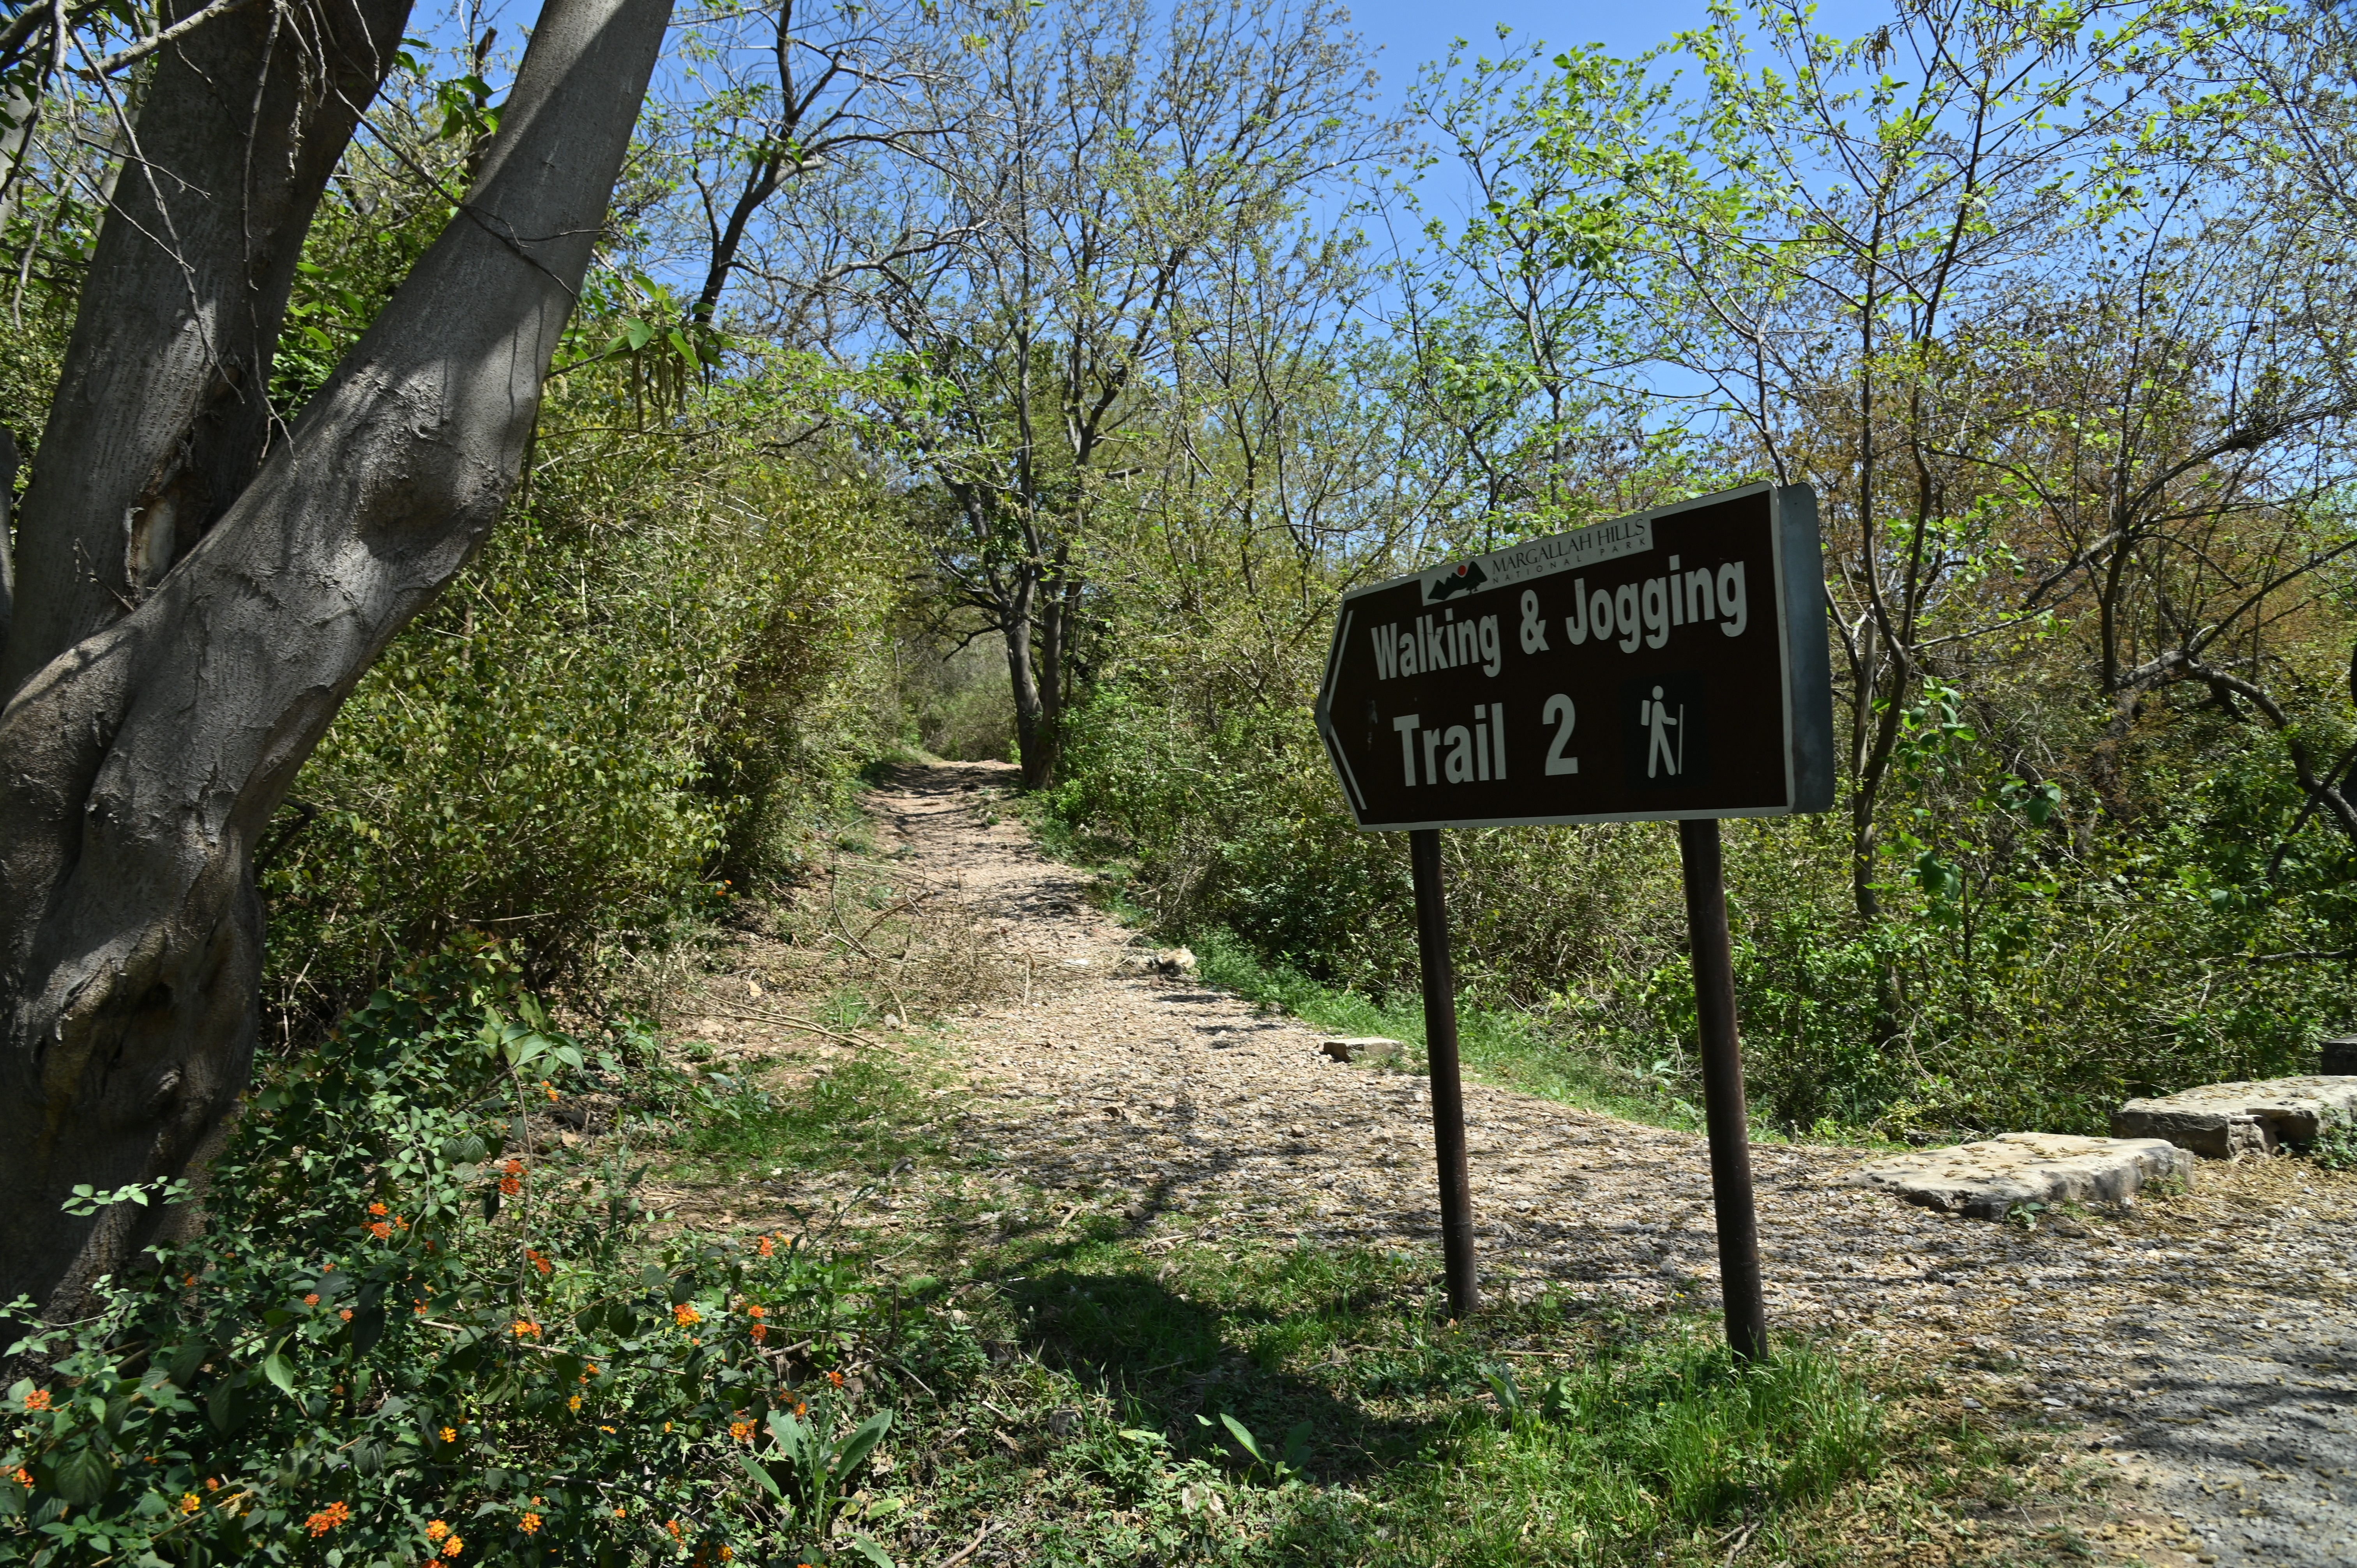 The walking and jogging track named Trail 2 that Starts out just above Pir Sohawa, the point located near Islamabad Zoo